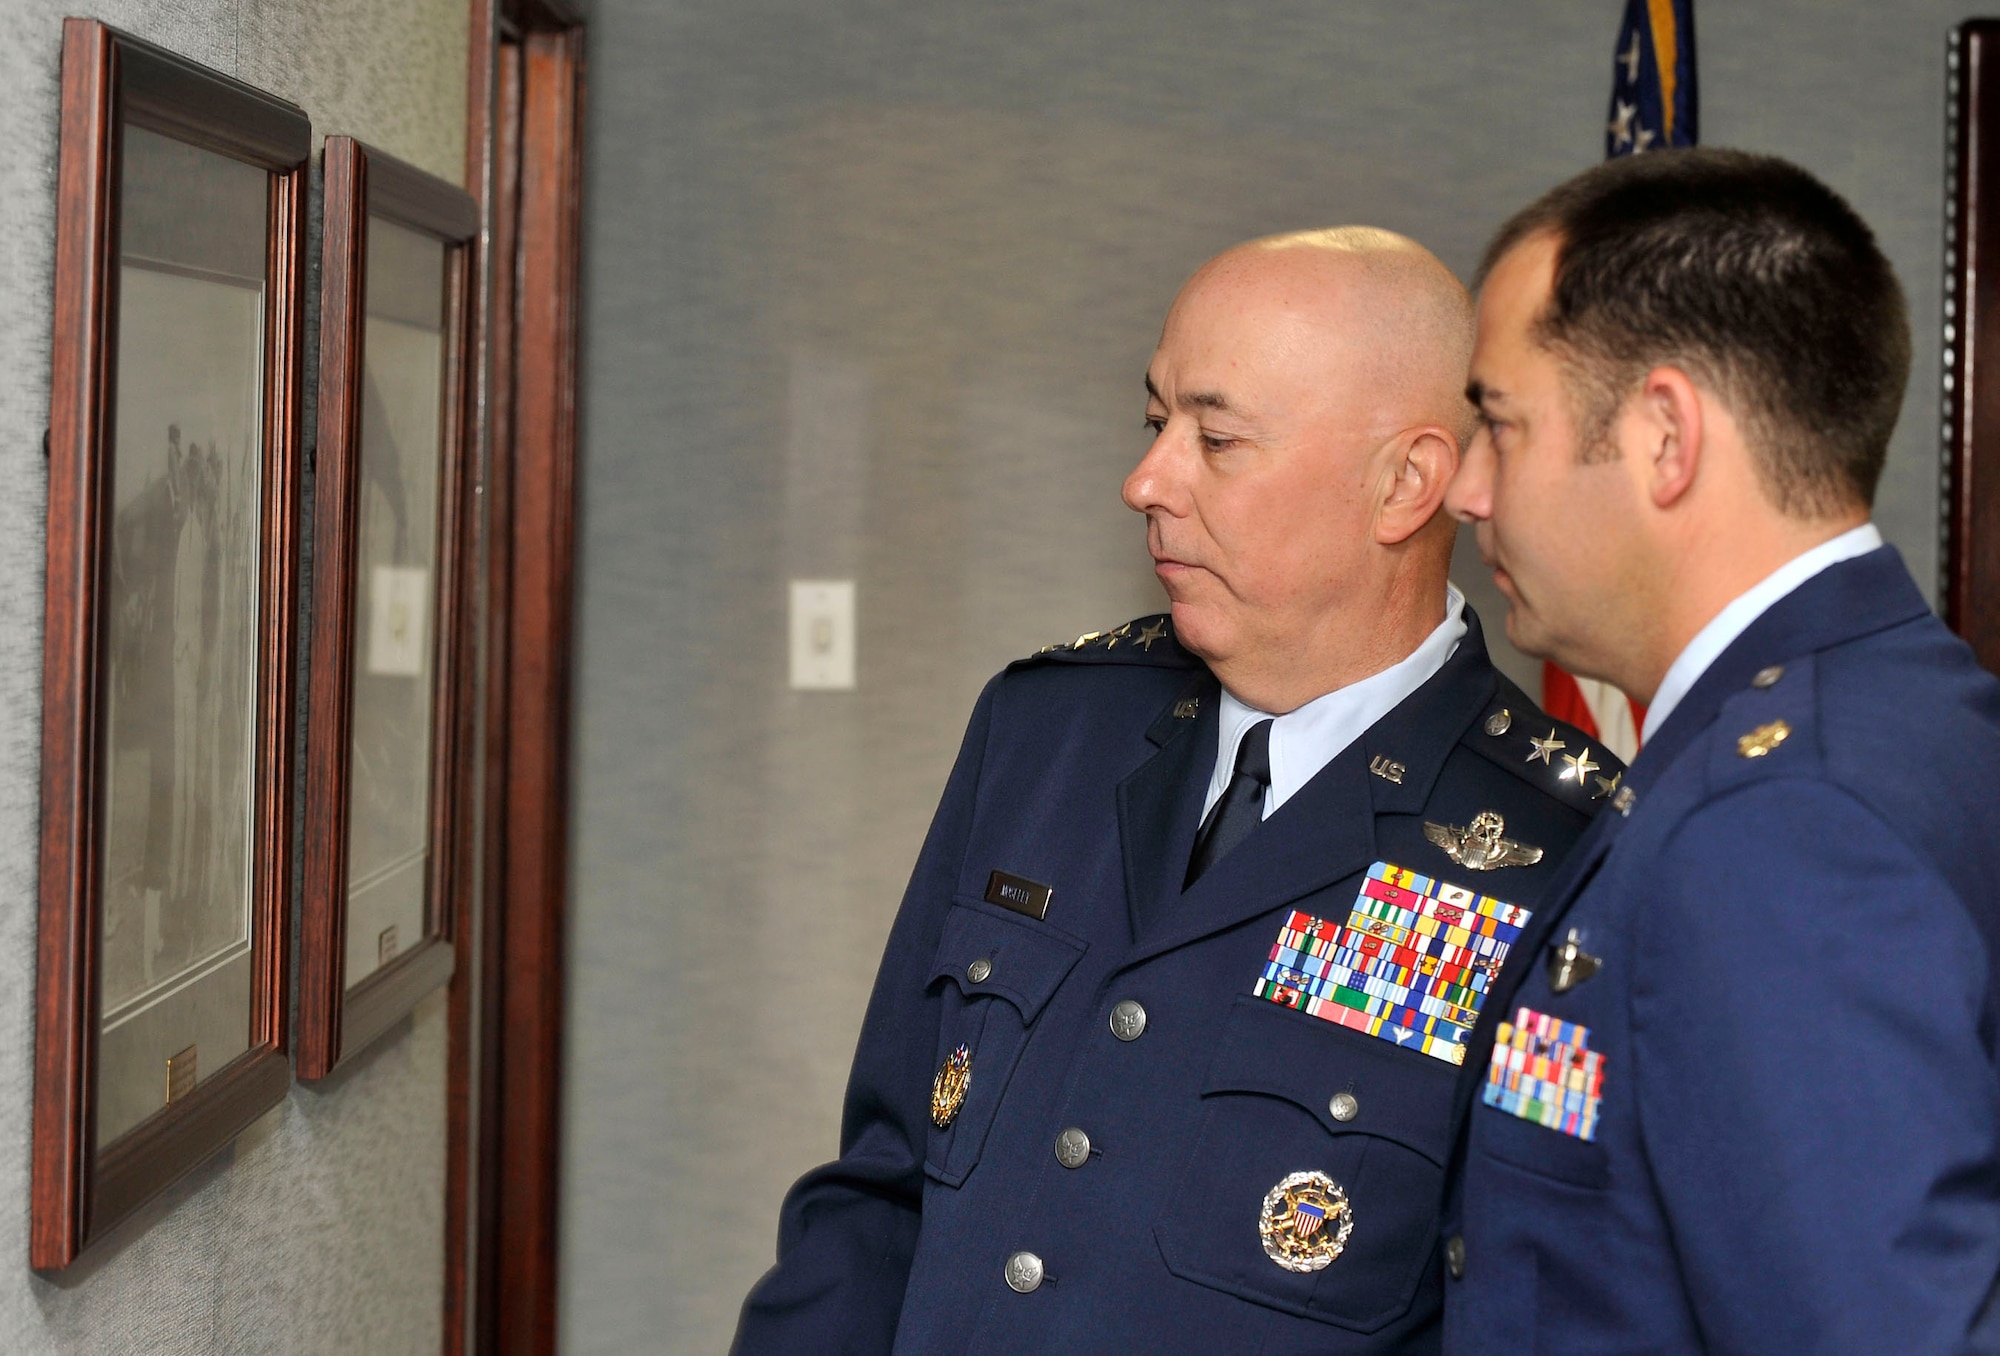 Gen. T. Michael Moseley admires historic photographs in the Mitchell Center with his son, Maj. Gregory M. Moseley, moments before General Moseley's retirement ceremony on Bolling Air Force Base, D.C., July 11  General Moseley is the 18th chief of staff.  His son is a weapons instructor at Tyndall Air Force Base, Fla. (U.S. Air Force photo/Scott M. Ash)